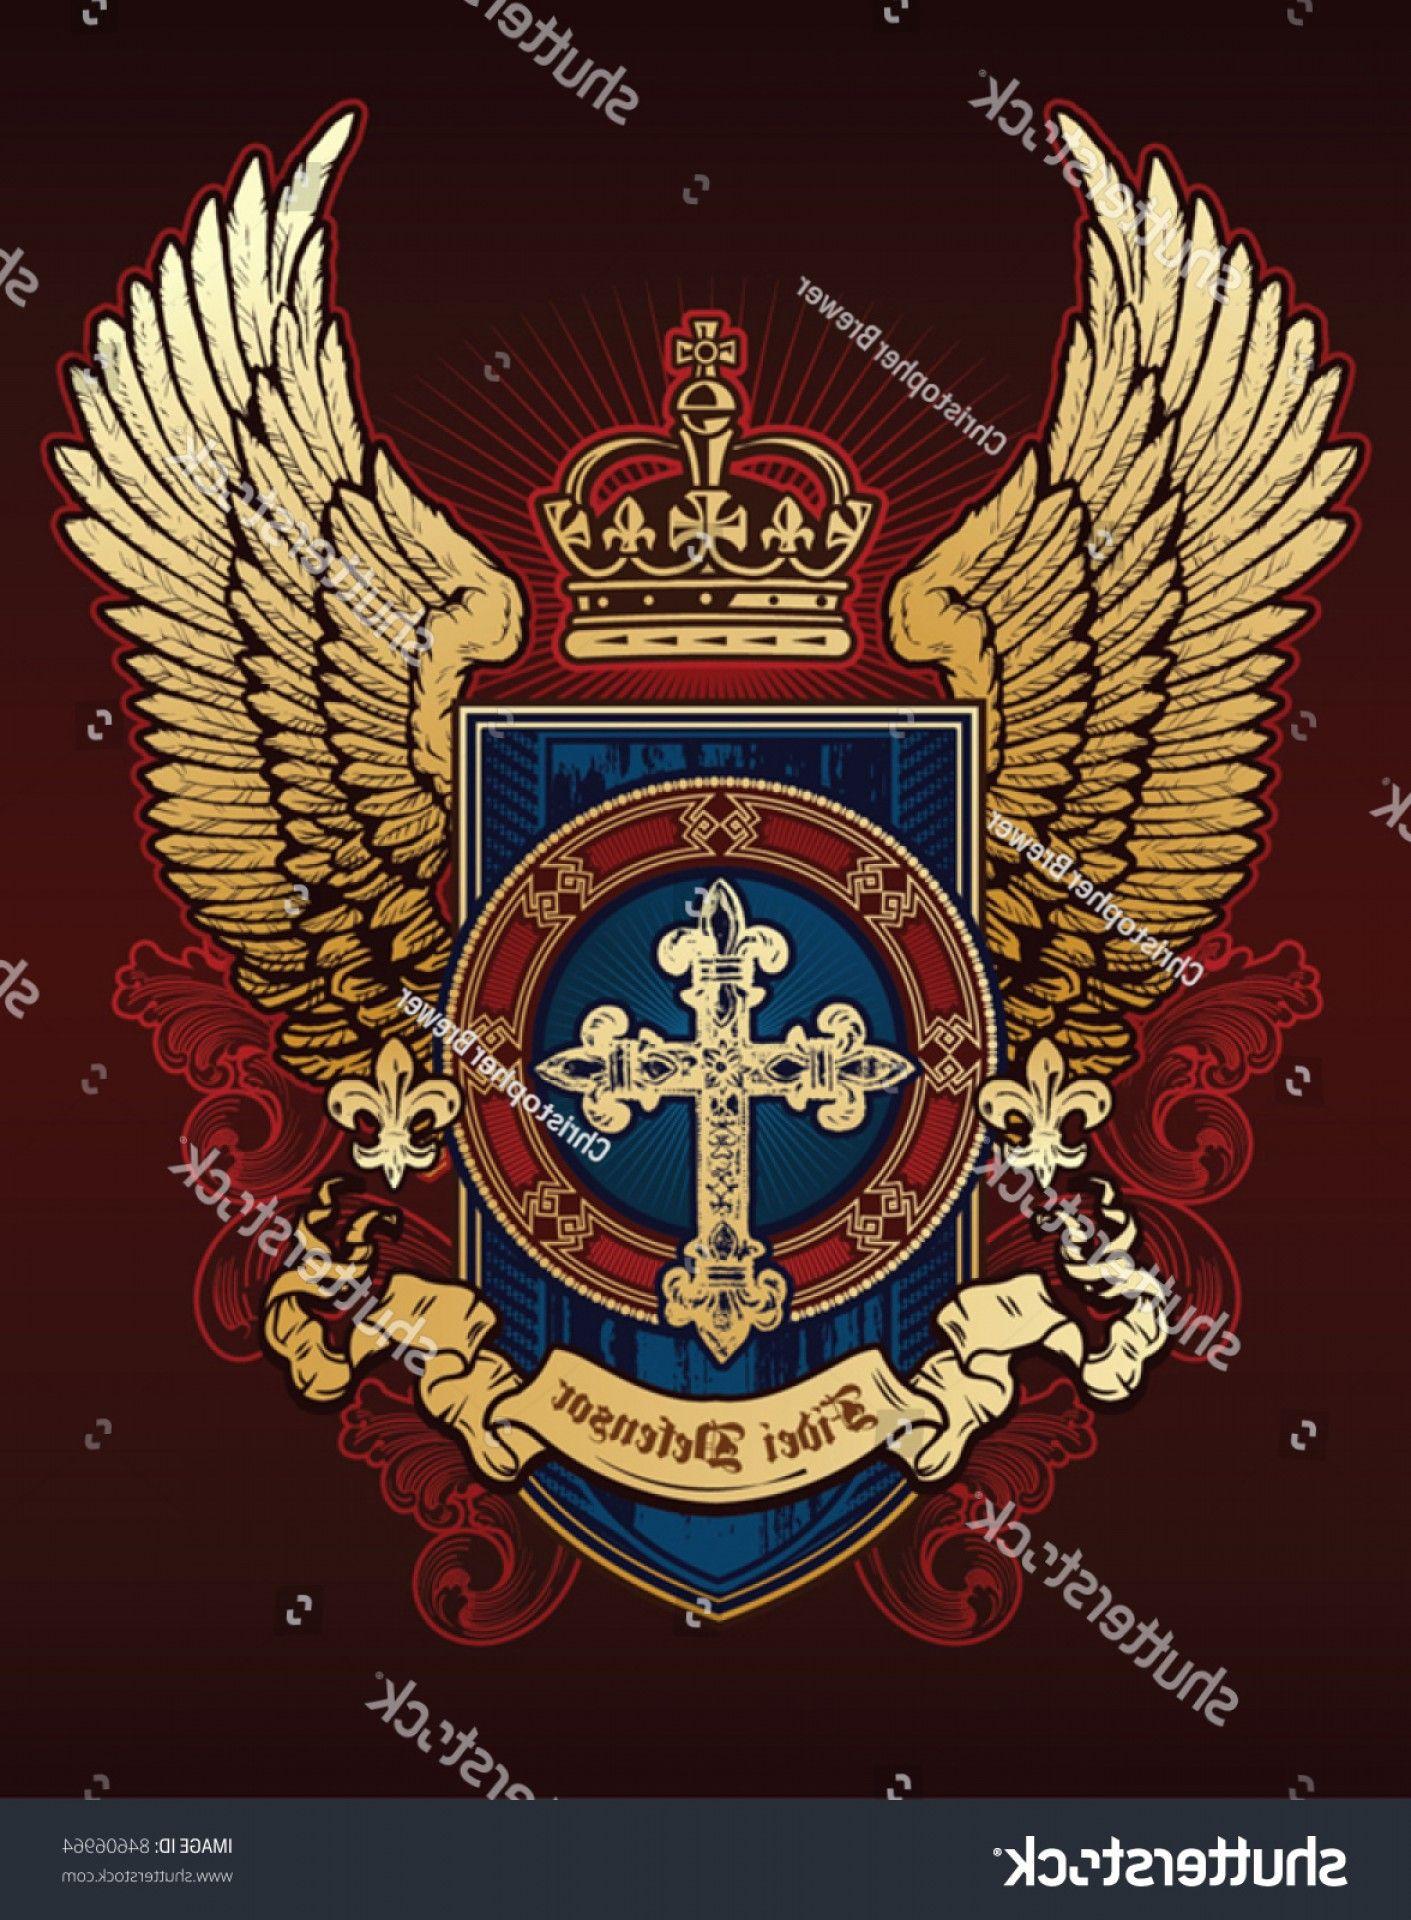 Red Gold Shield Logo - Cross Wing Shield Red Blue Gold | ARENAWP